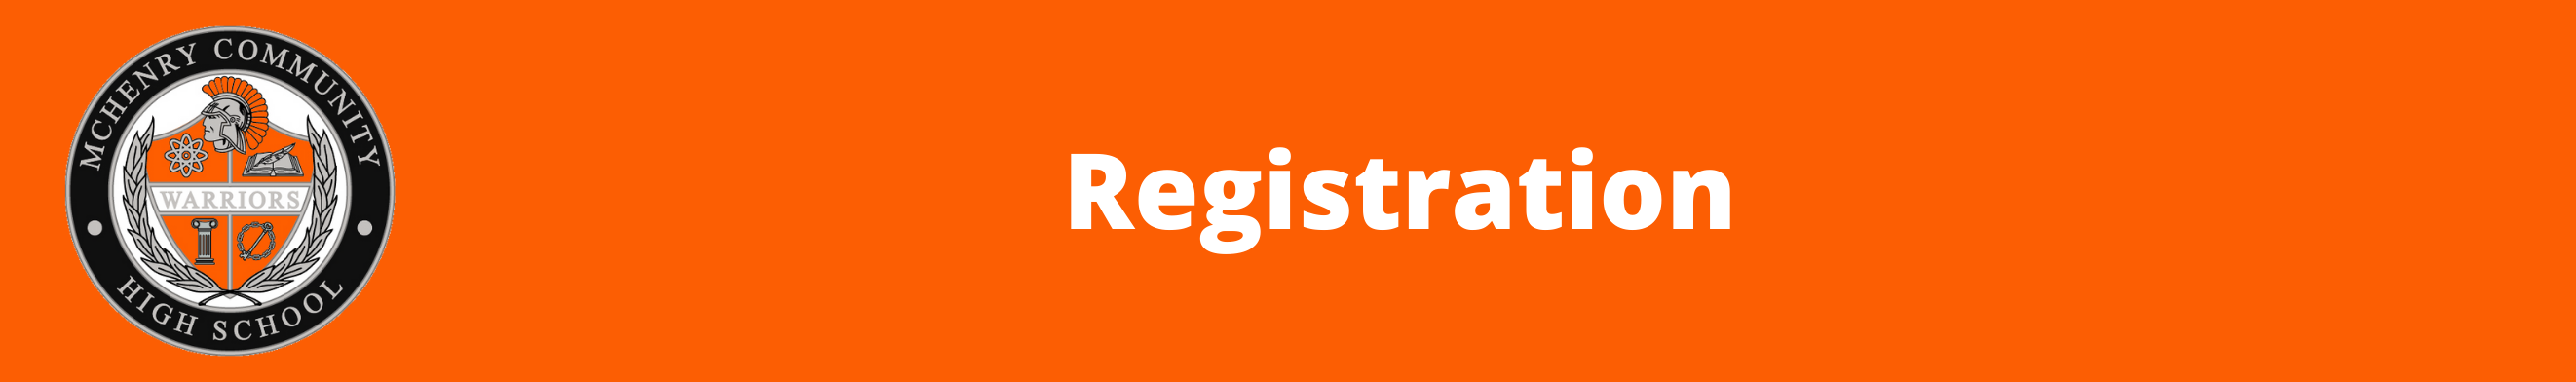 Registration/Residency/Withdrawing students